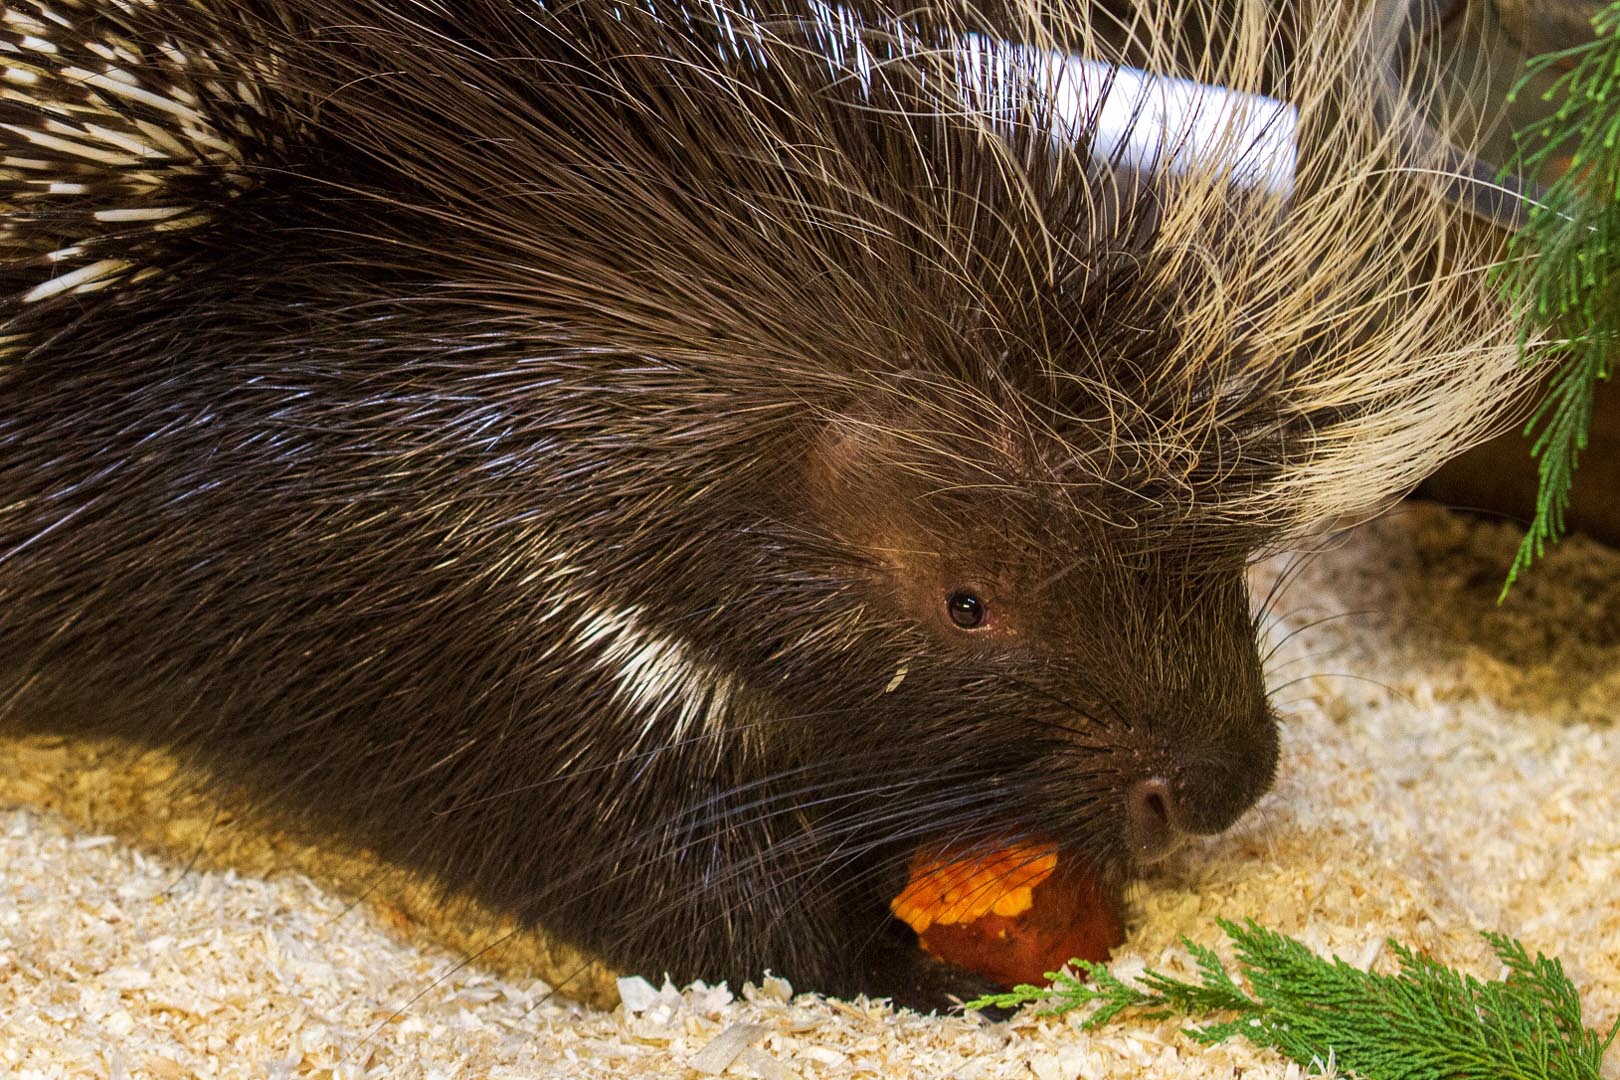 Cape porcupine Rick eating vegetables indoors IMAGE: Laura Moore (2020)